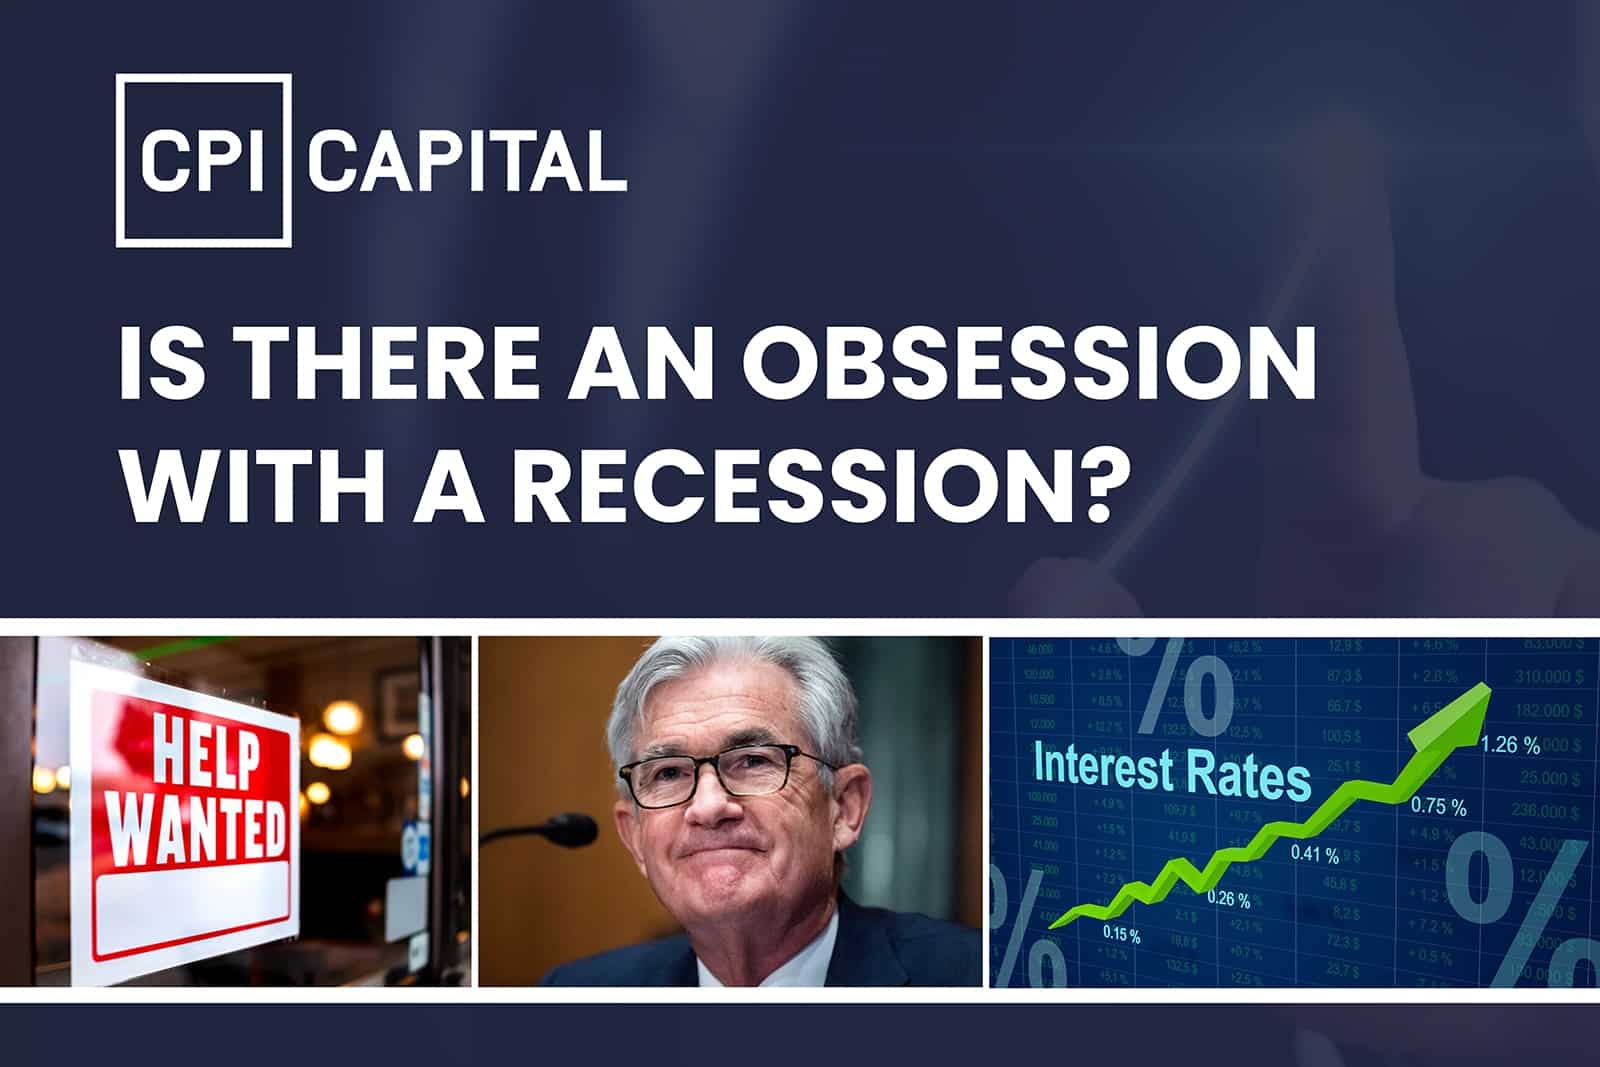 CPI capital_Is there an obsession with a recession